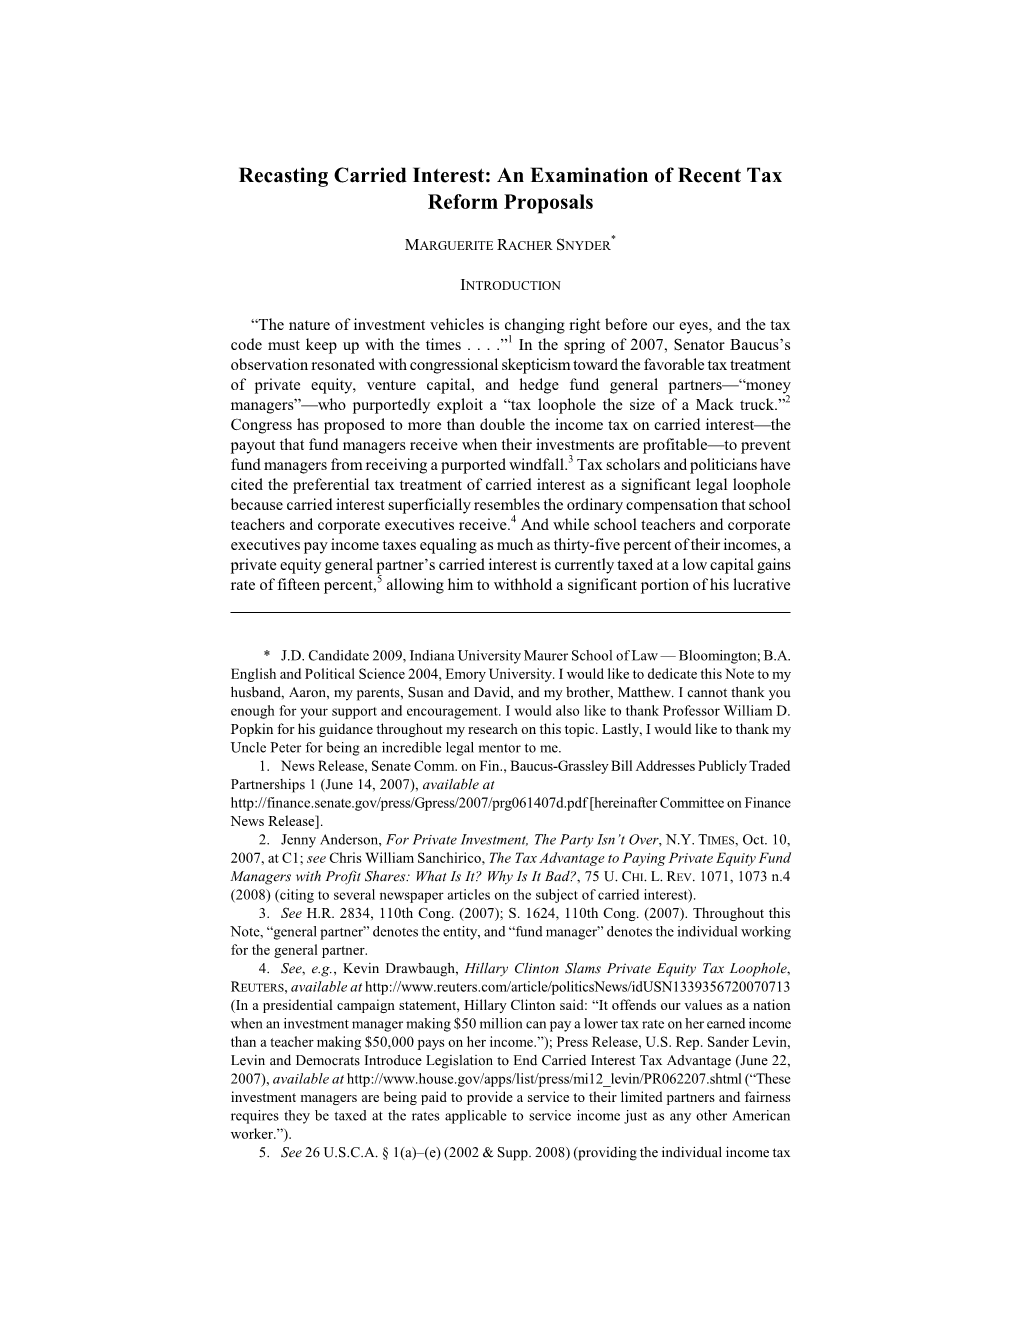 Recasting Carried Interest: an Examination of Recent Tax Reform Proposals